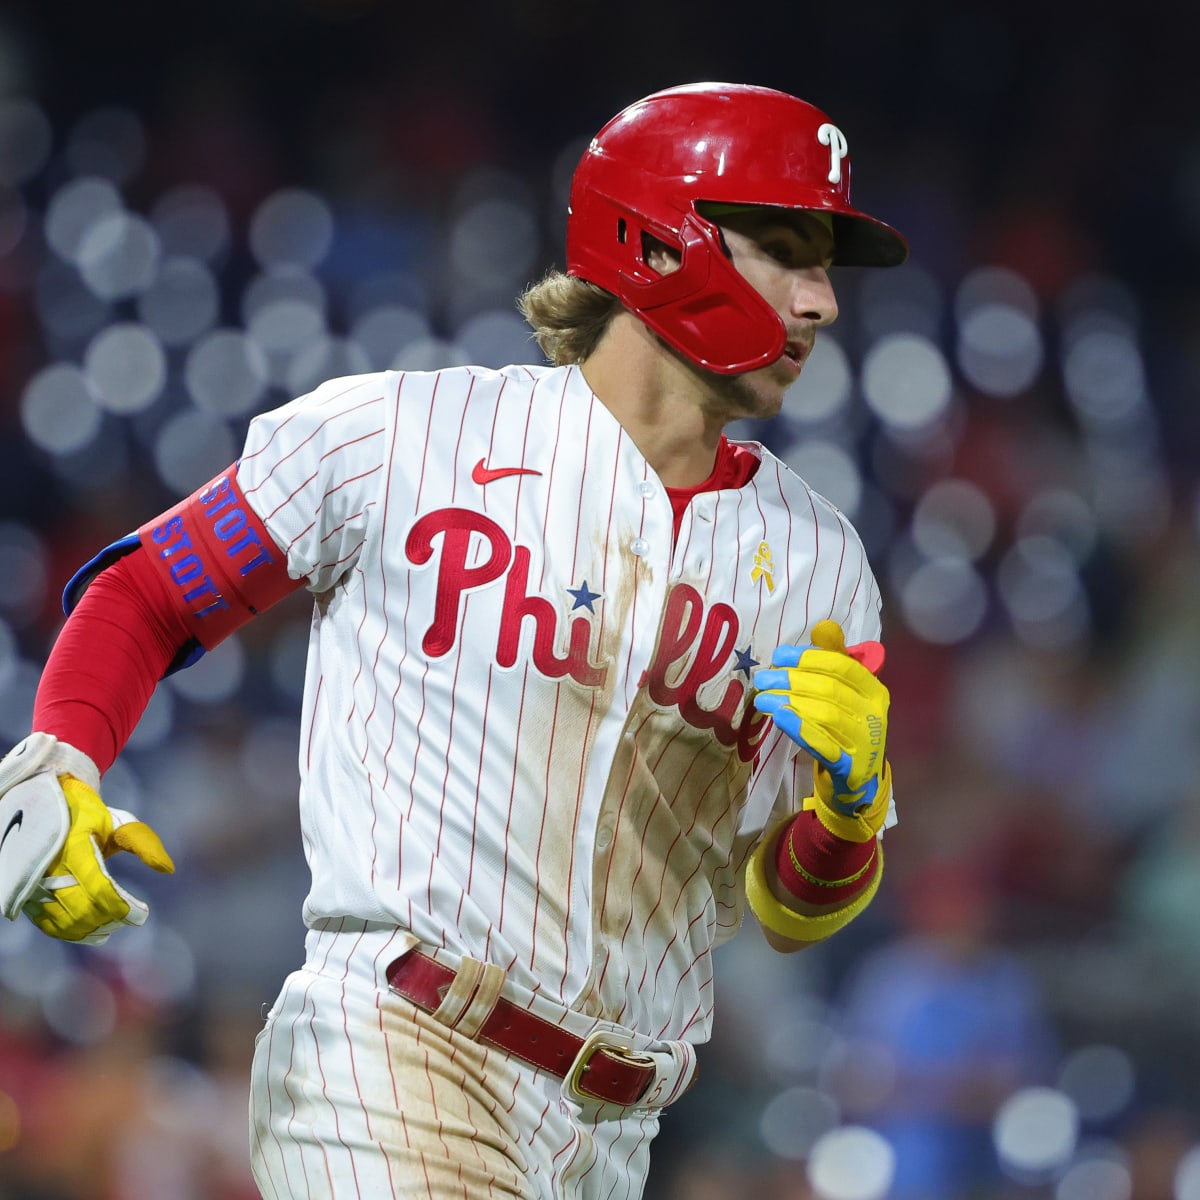 Inside rookie Bryson Stotts incredible atbat that sparked Phillies rally   Phillies Nation  Your source for Philadelphia Phillies news opinion  history rumors events and other fun stuff